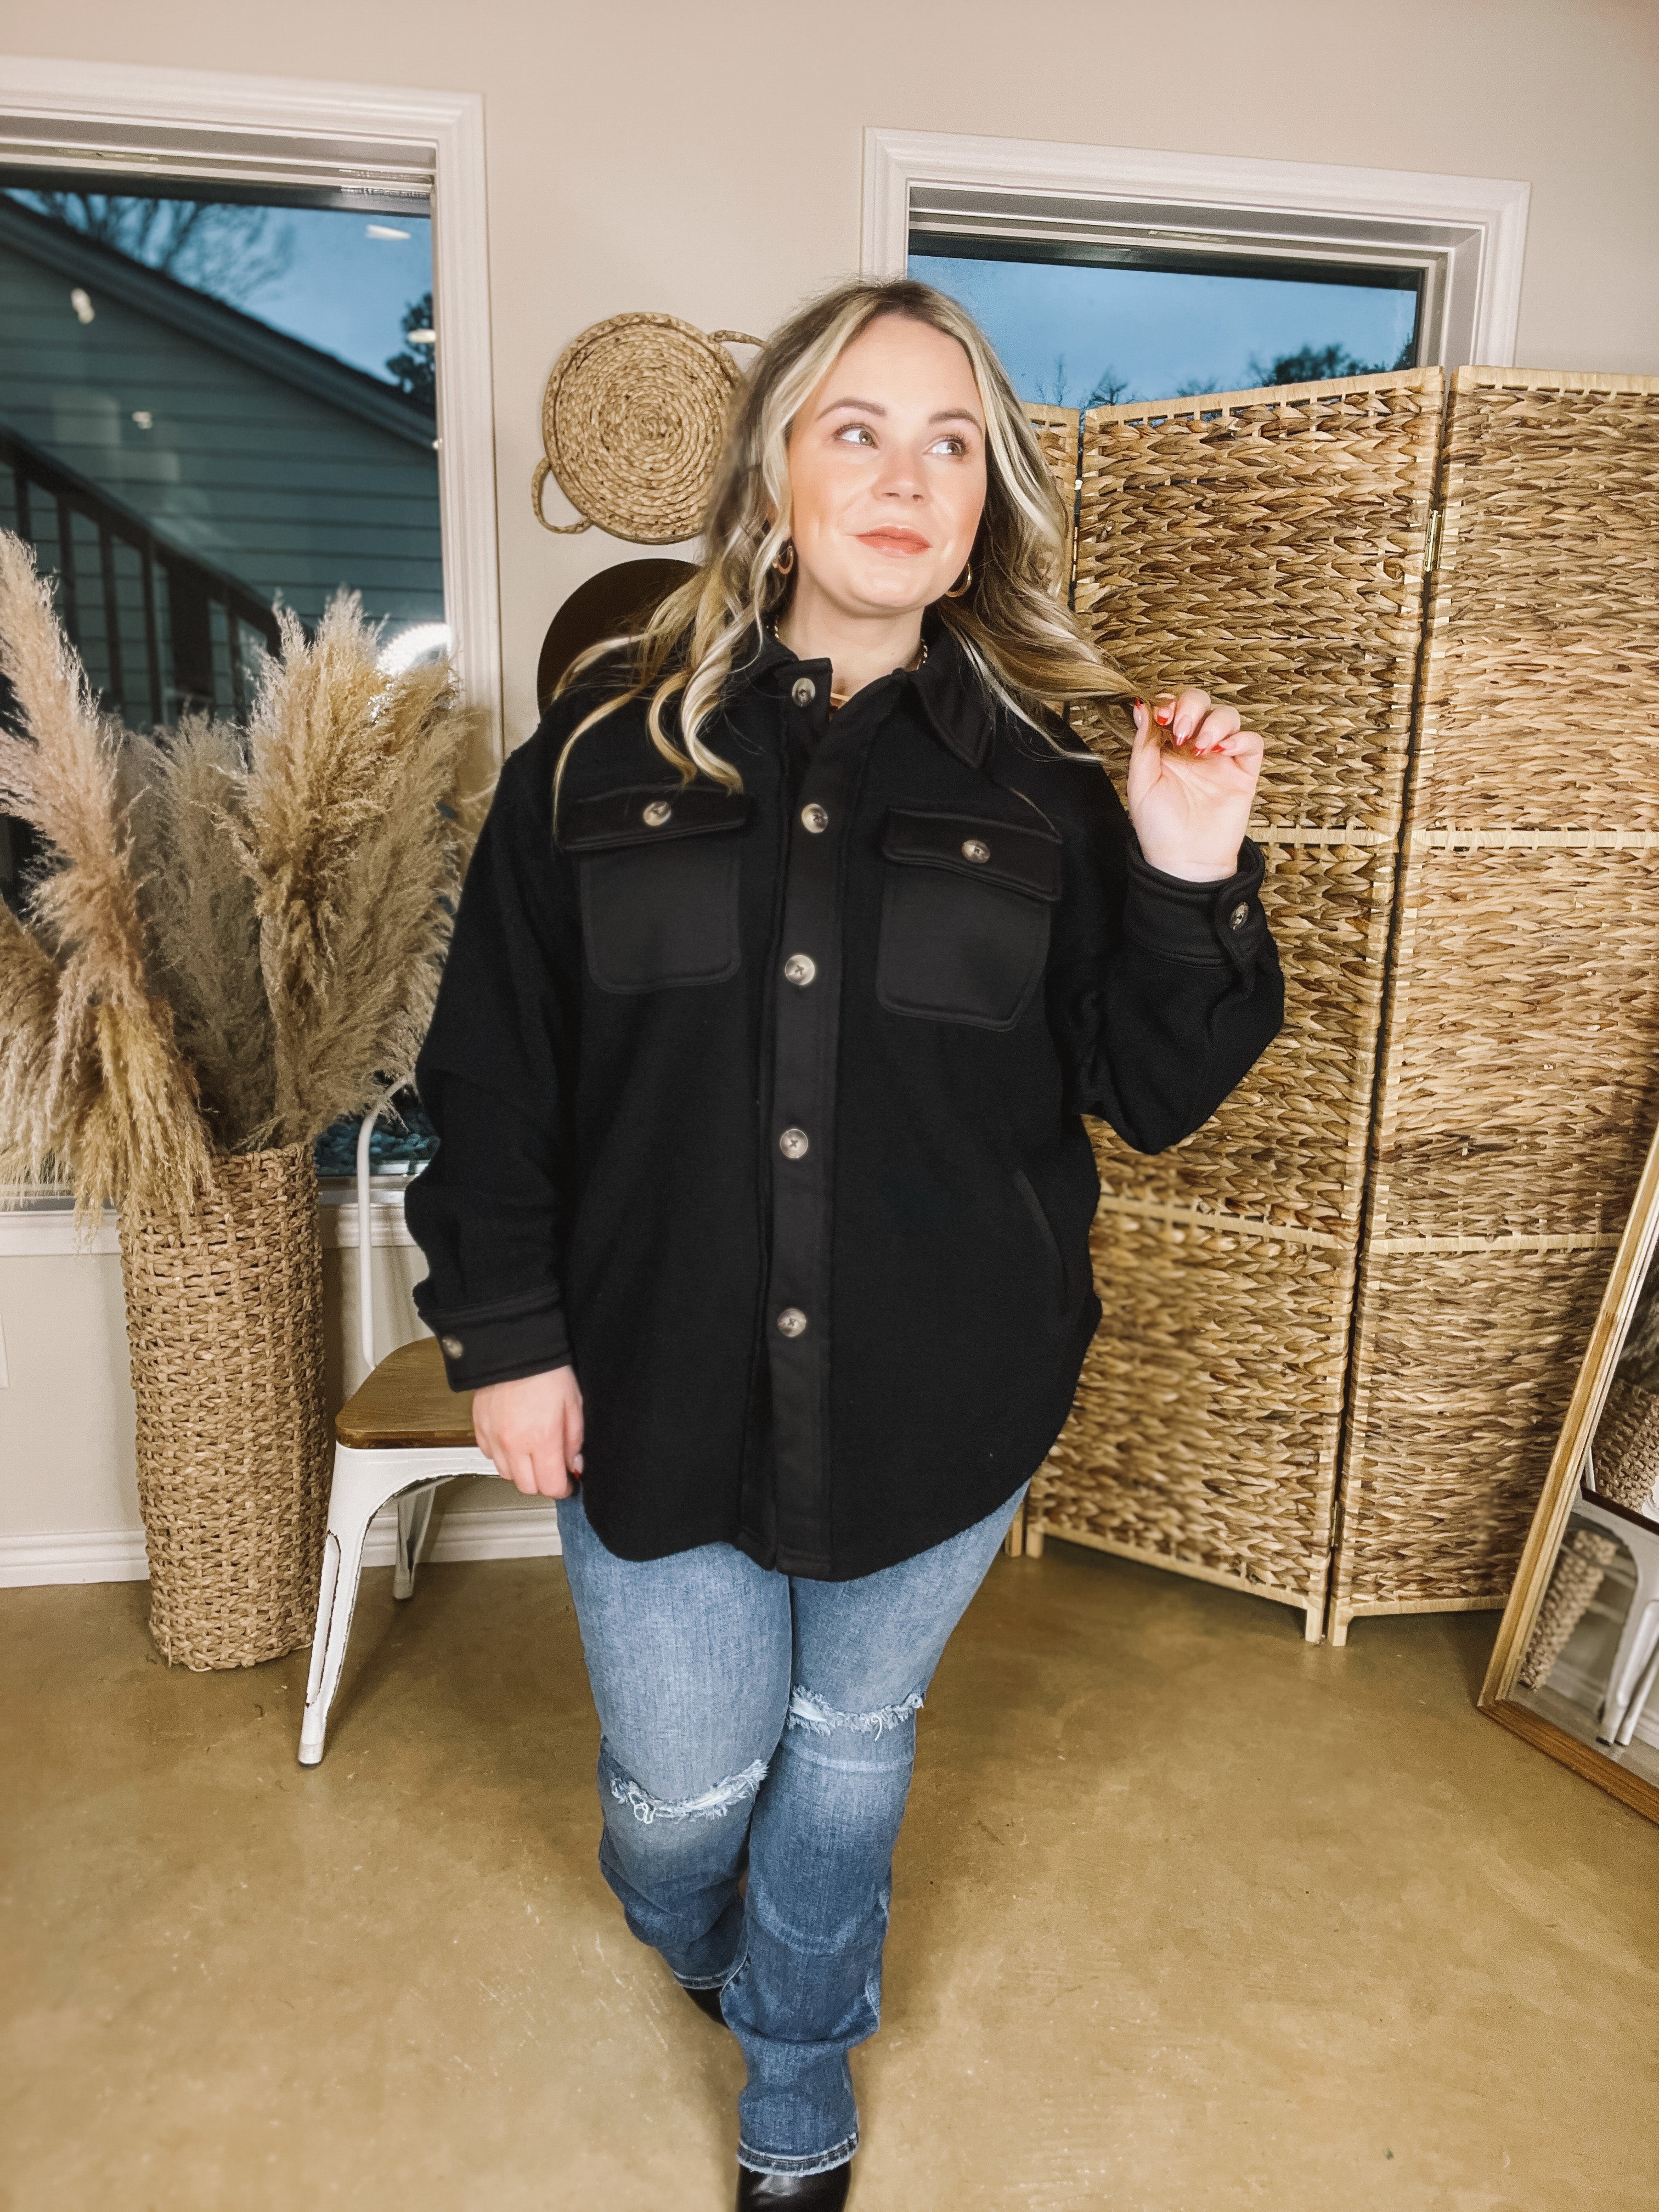 Hollywood Hike Button Up Fleece Jacket with Pockets in Black - Giddy Up Glamour Boutique